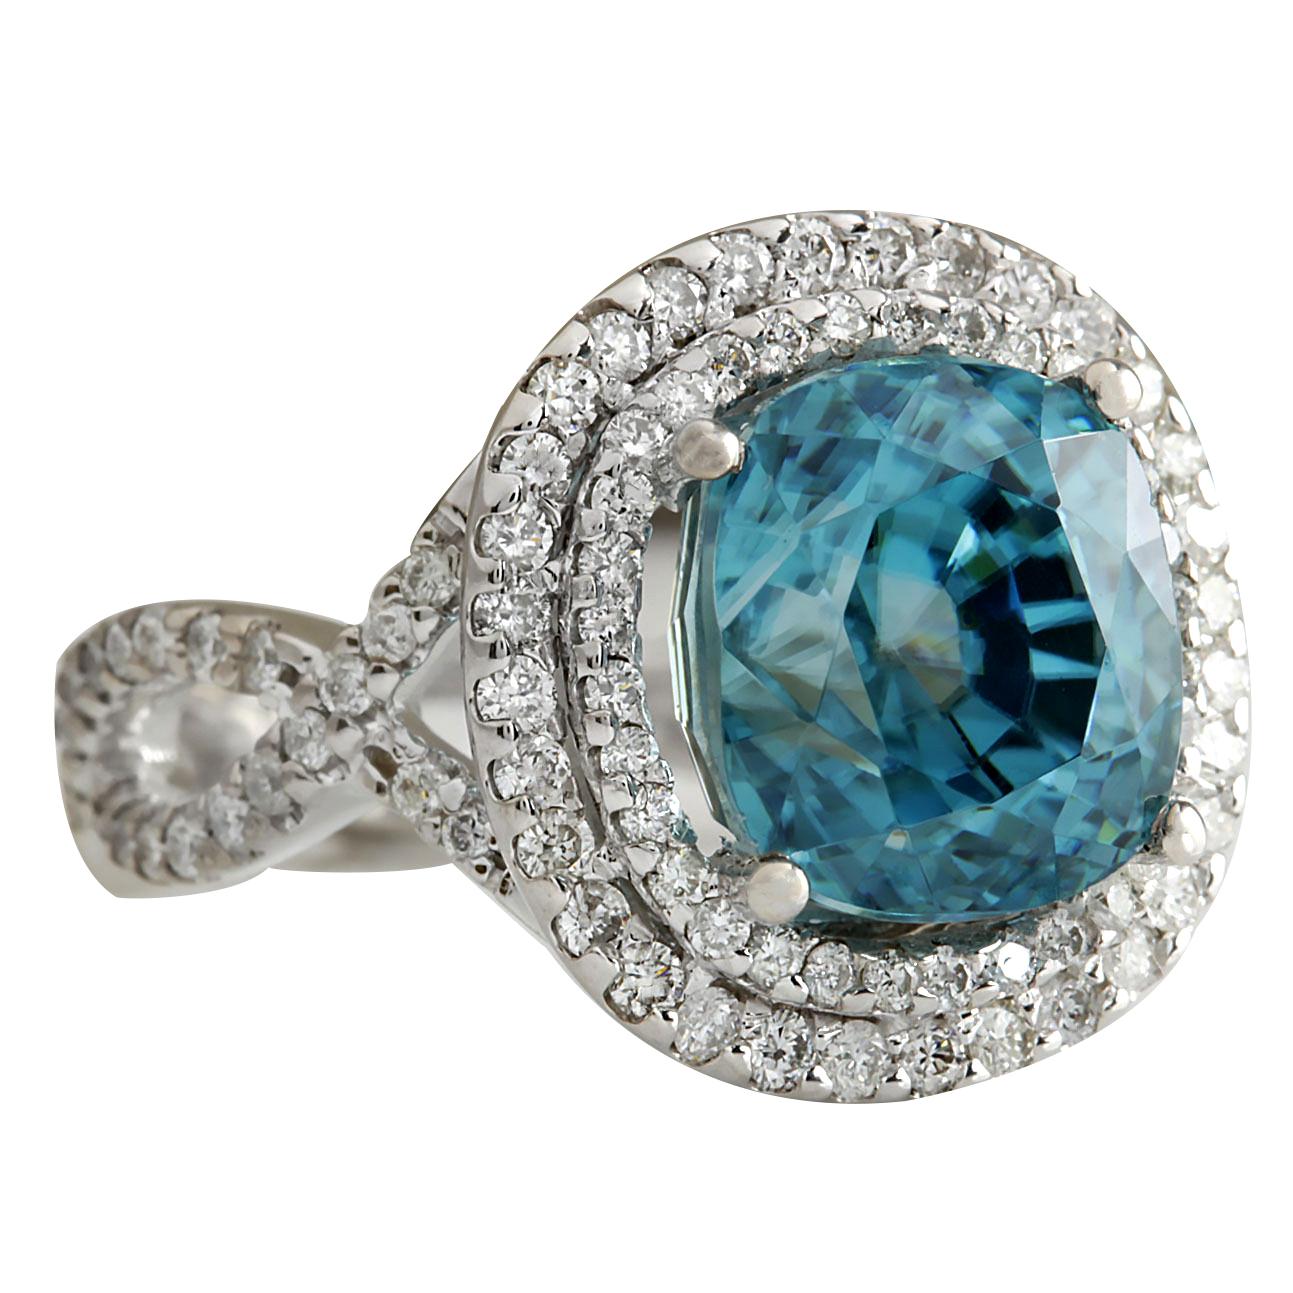 Stamped: 14K White Gold
Total Ring Weight: 10.4 Grams
Total Natural Zircon Weight is 12.12 Carat (Measures: 11.00x9.00 mm)
Color: Blue
Total Natural Diamond Weight is 1.16 Carat
Color: F-G, Clarity: VS2-SI1
Face Measures: 16.95x15.80 mm
Sku: